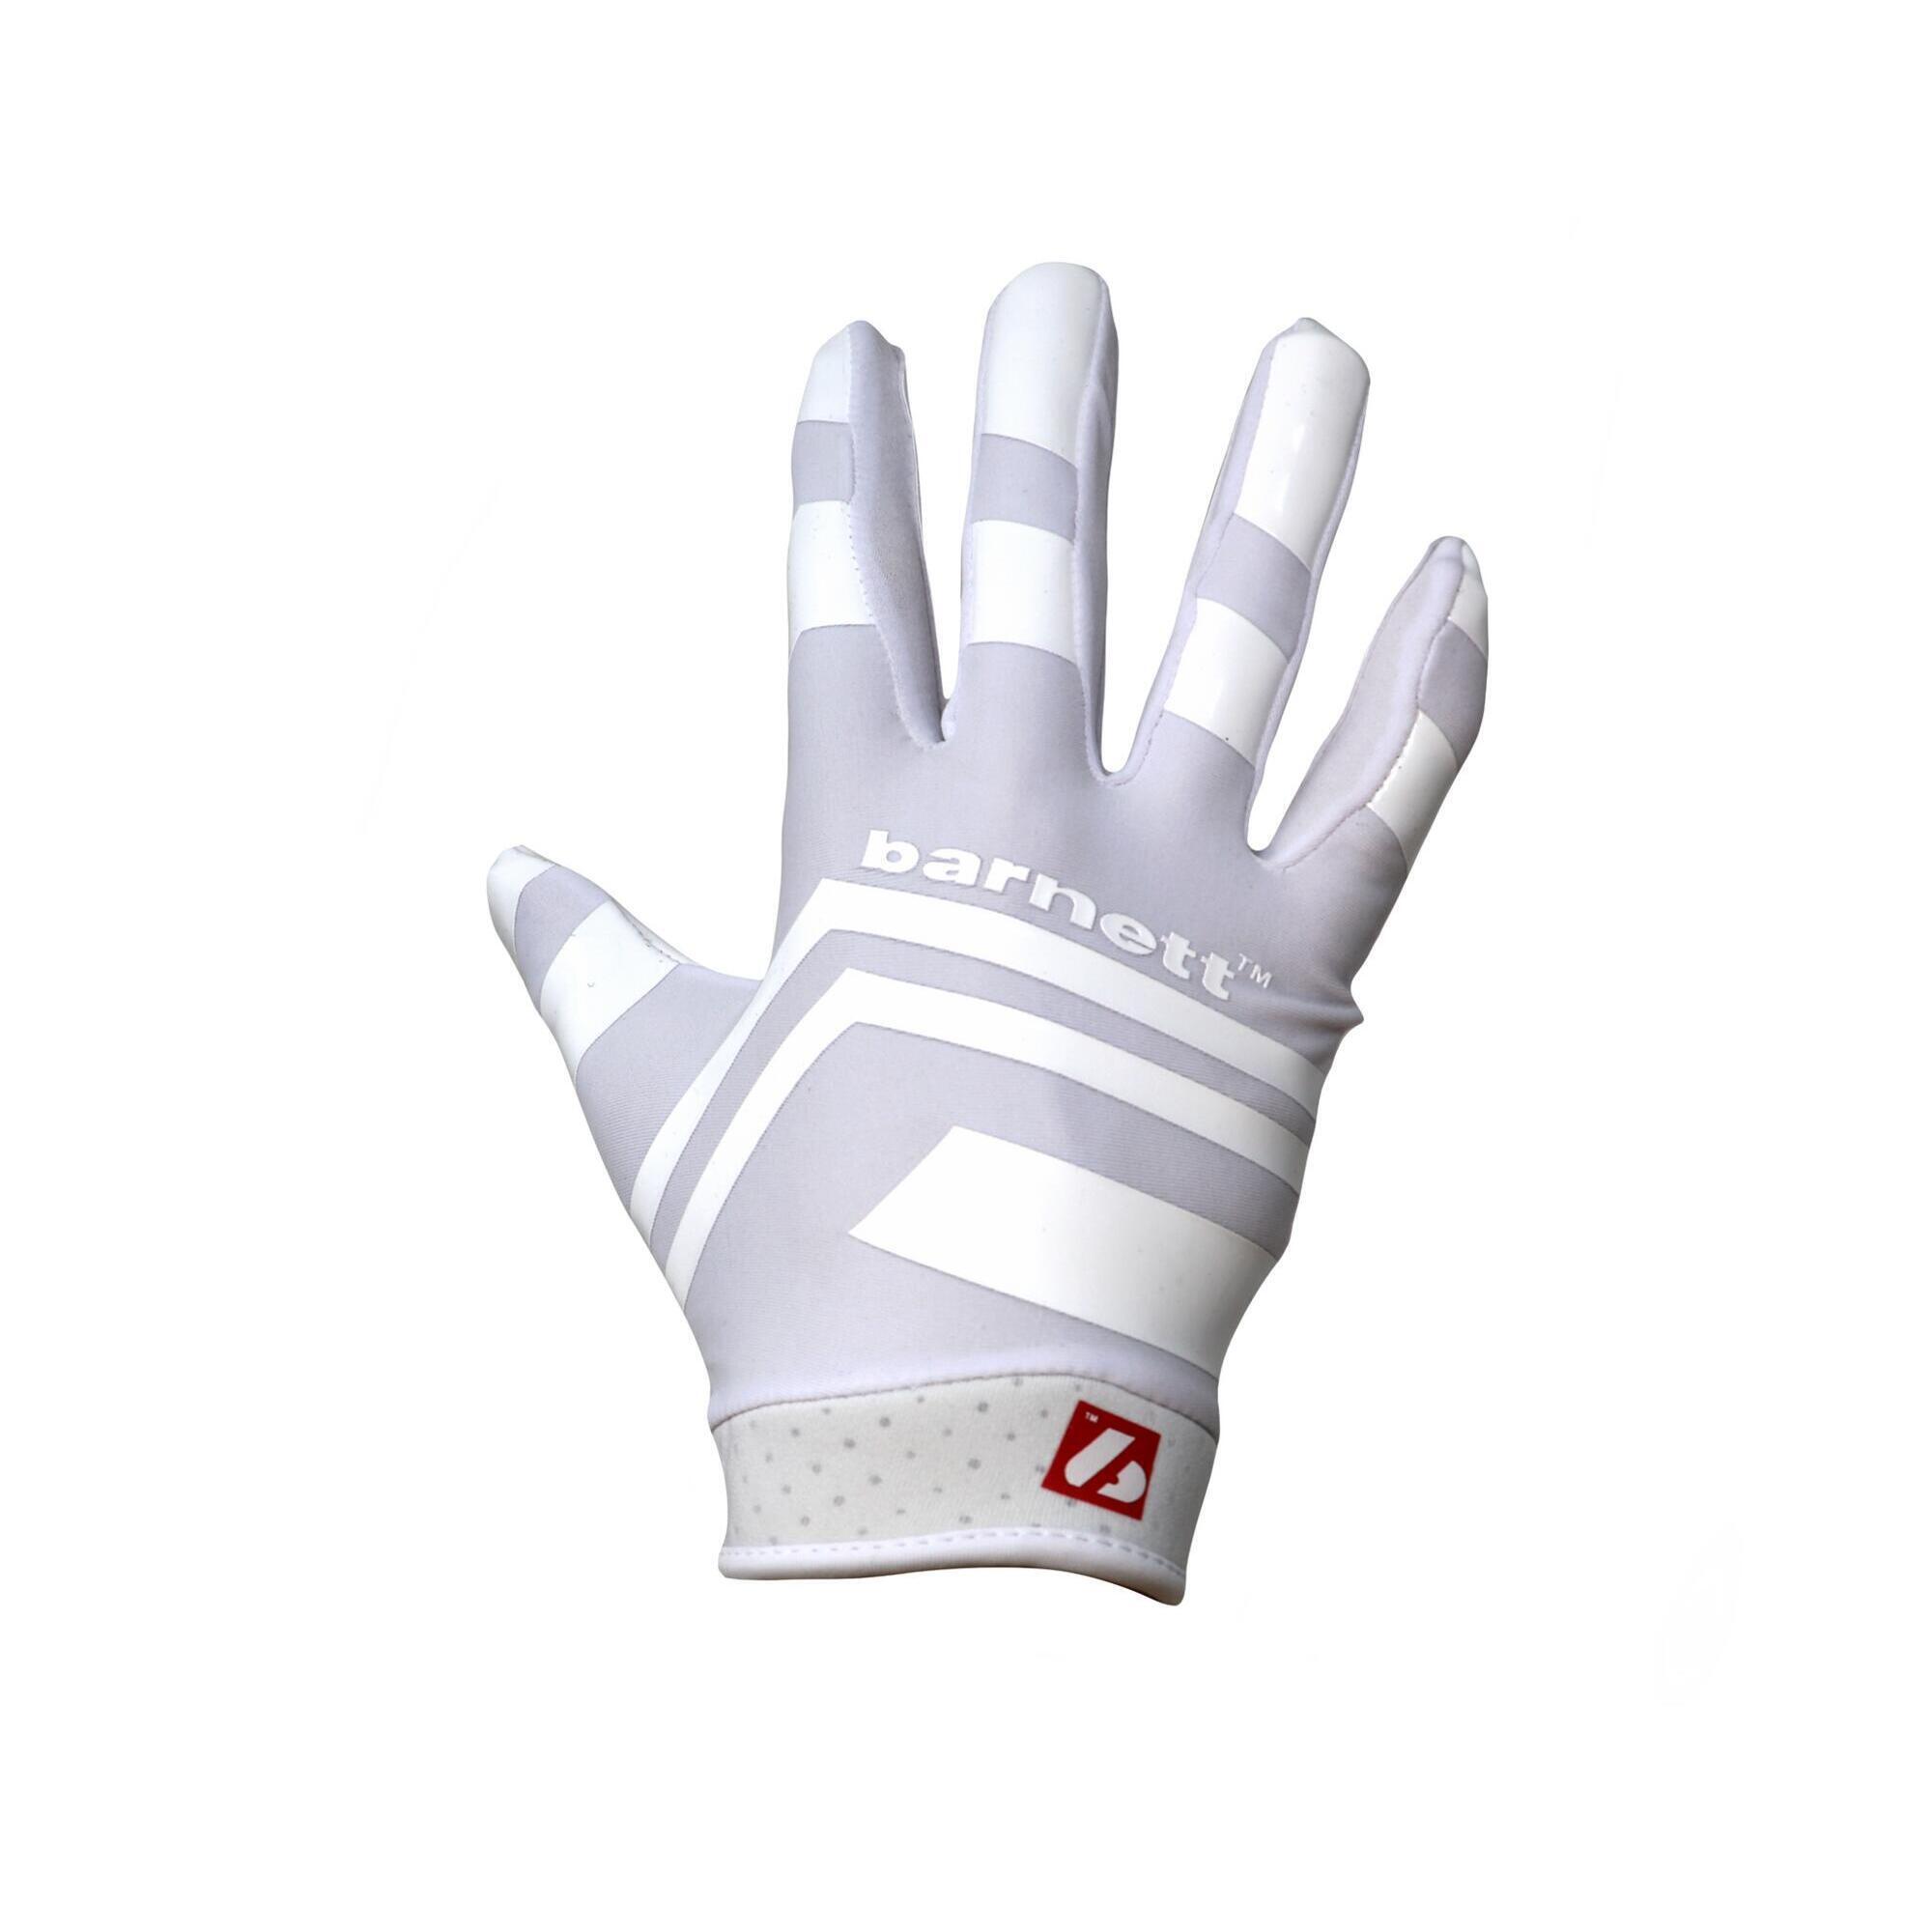  pro receiver american football gloves, RE, DB, RB, White FRG-03 2/4